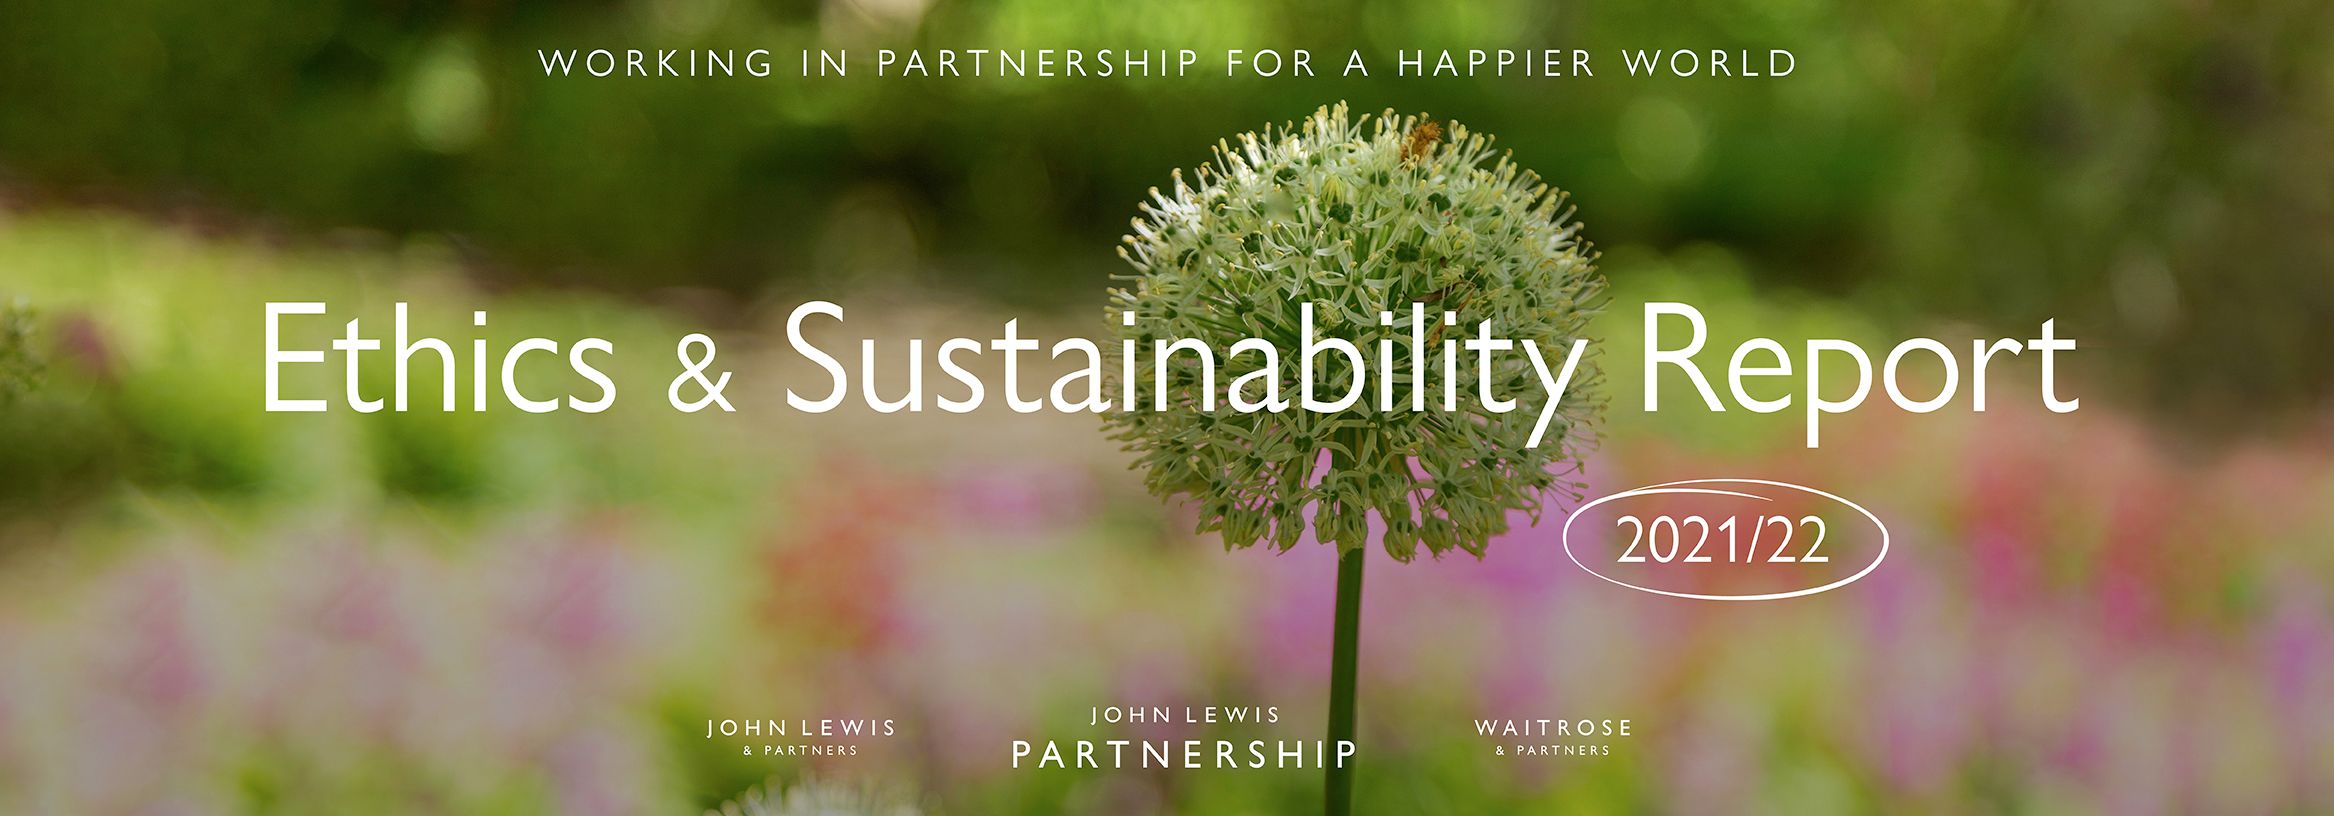 Ethics and Sustainability banner